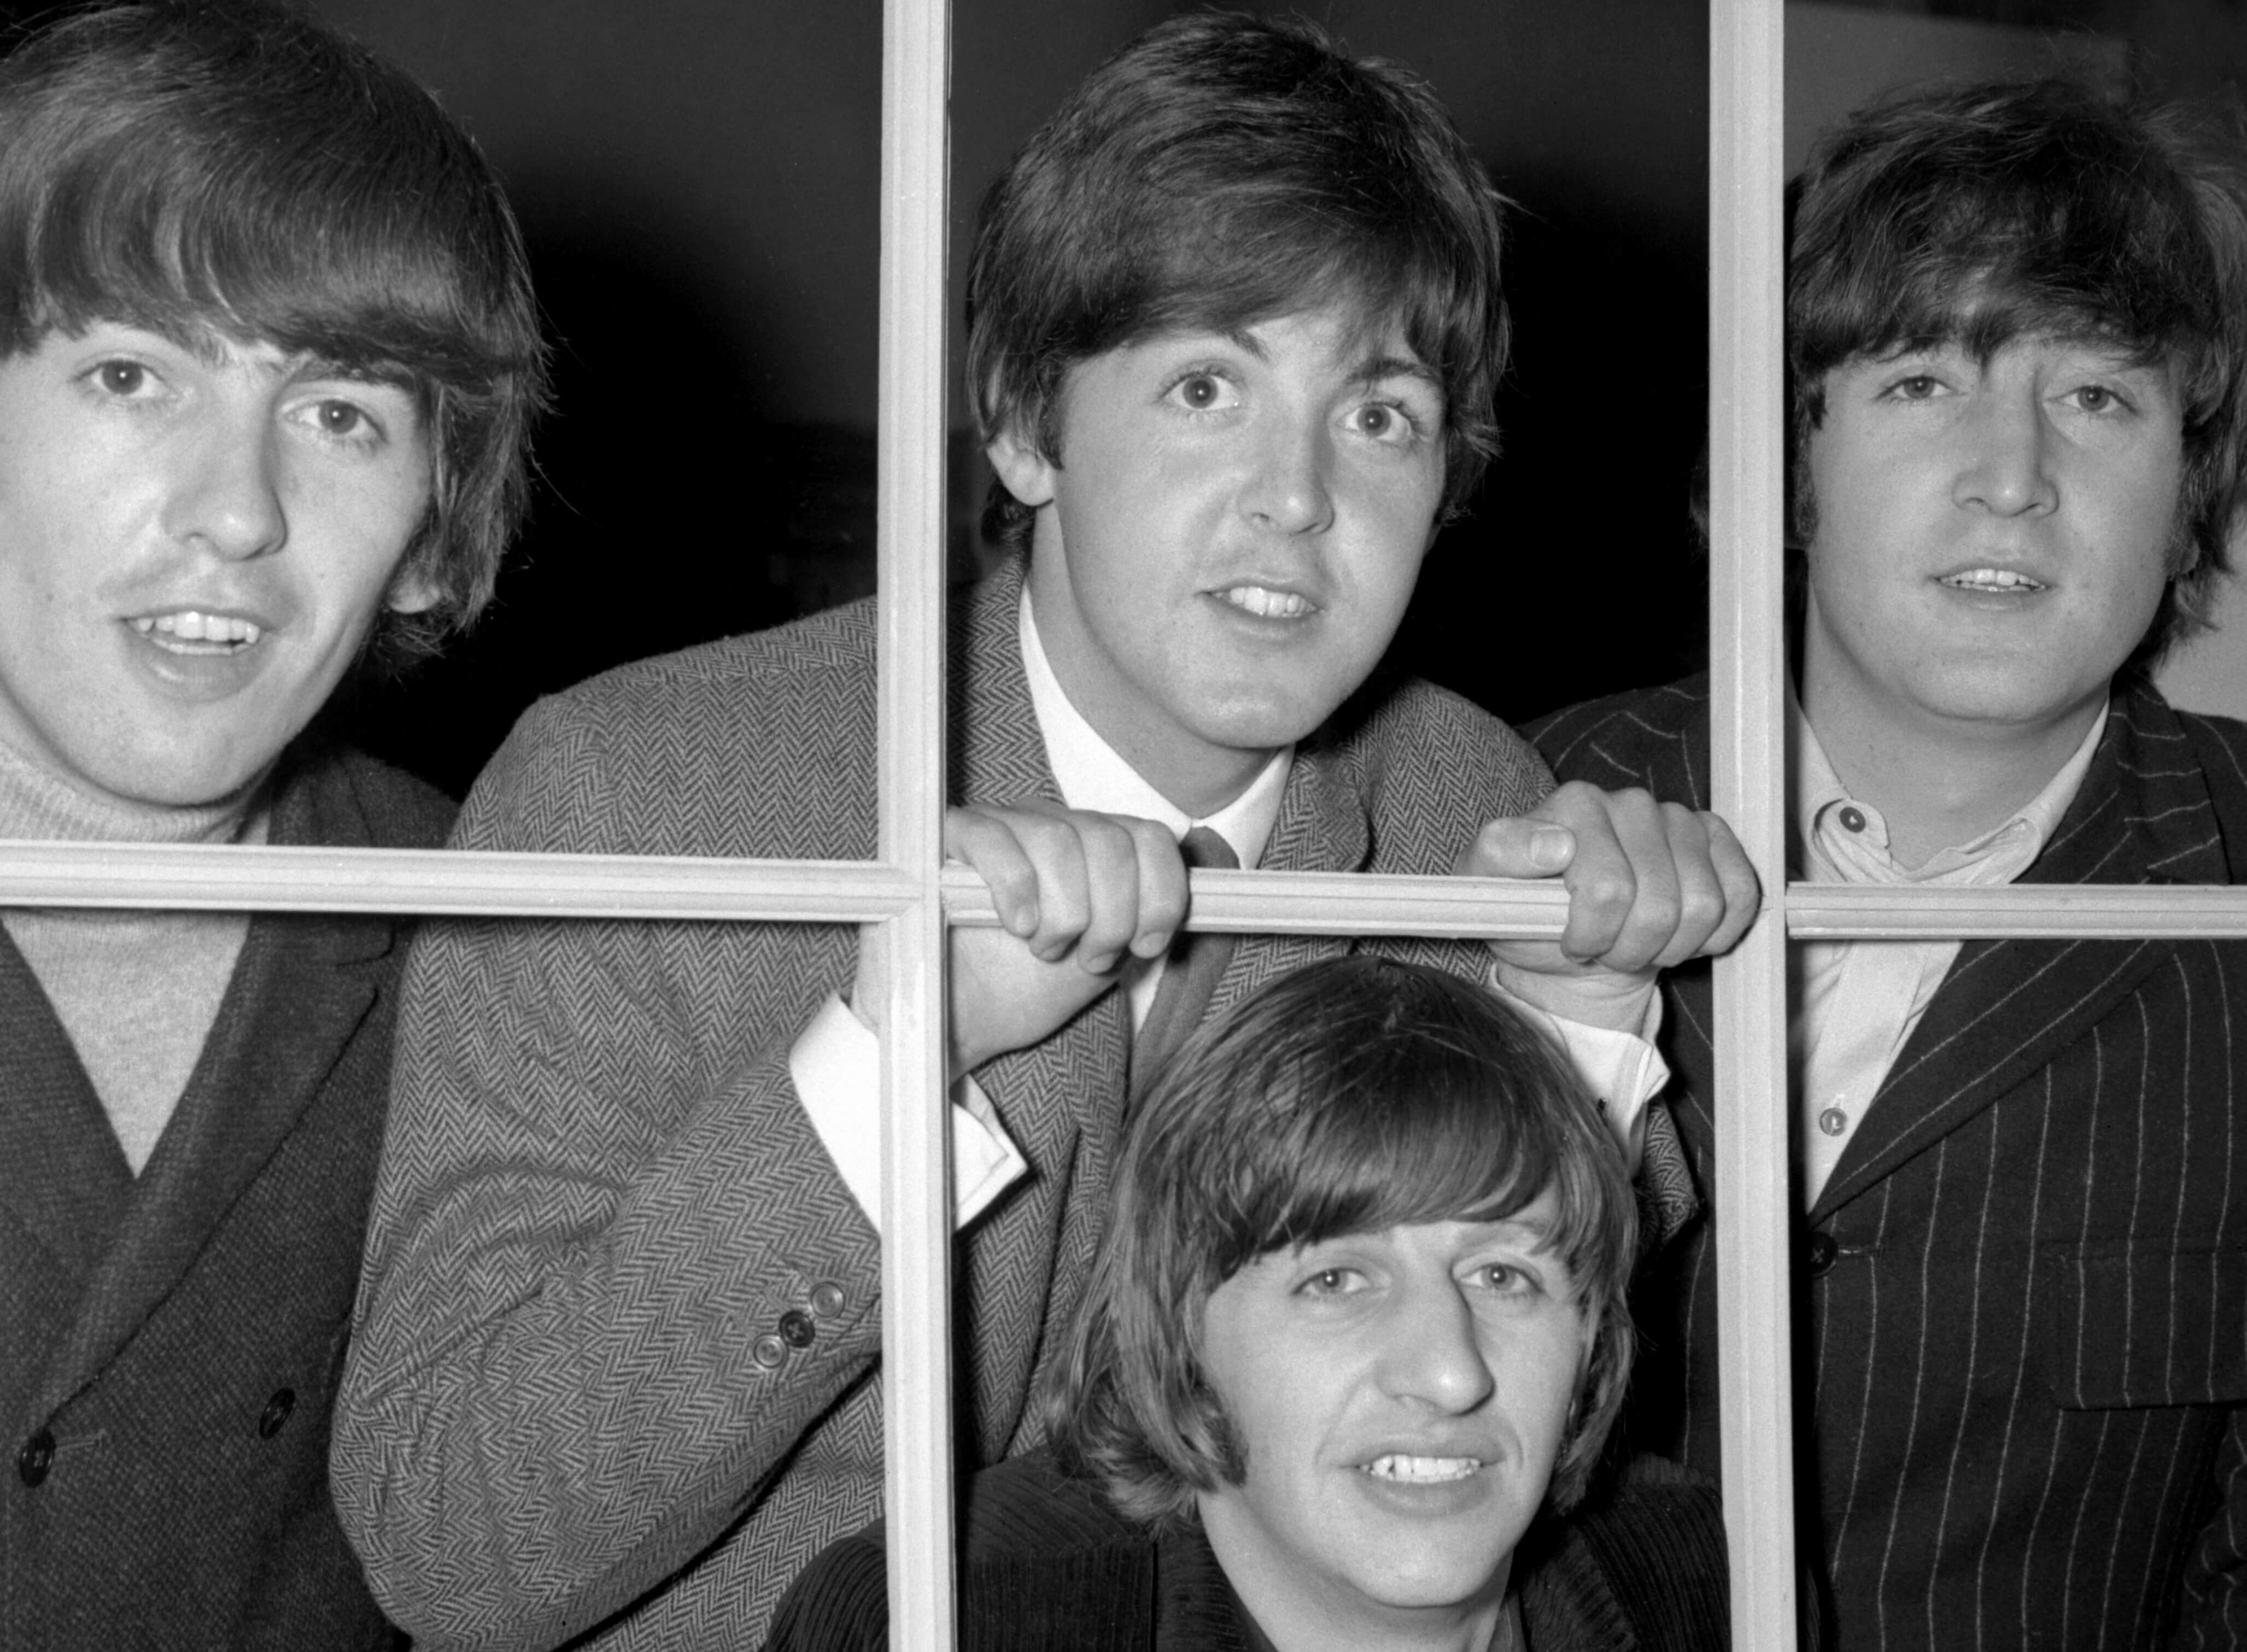 The Beatles near a window during the 'Rubber Soul' era